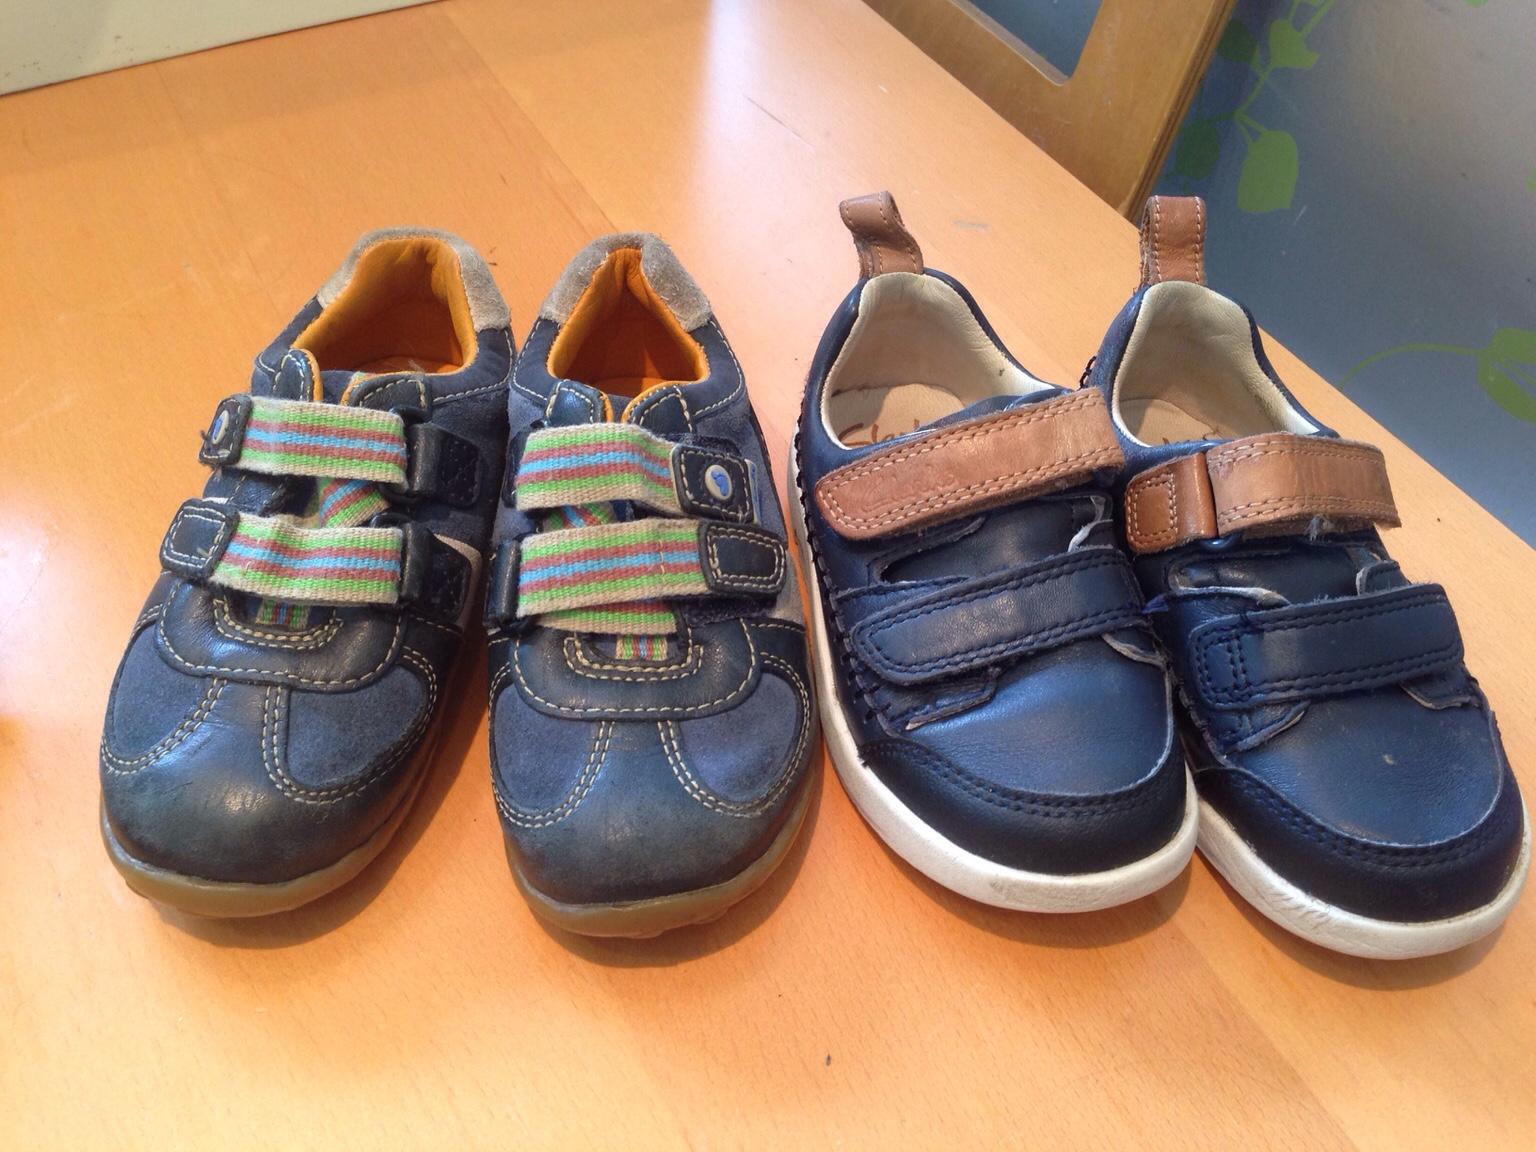 Clarks Boys First Shoes Size 5.5G \u0026 5 